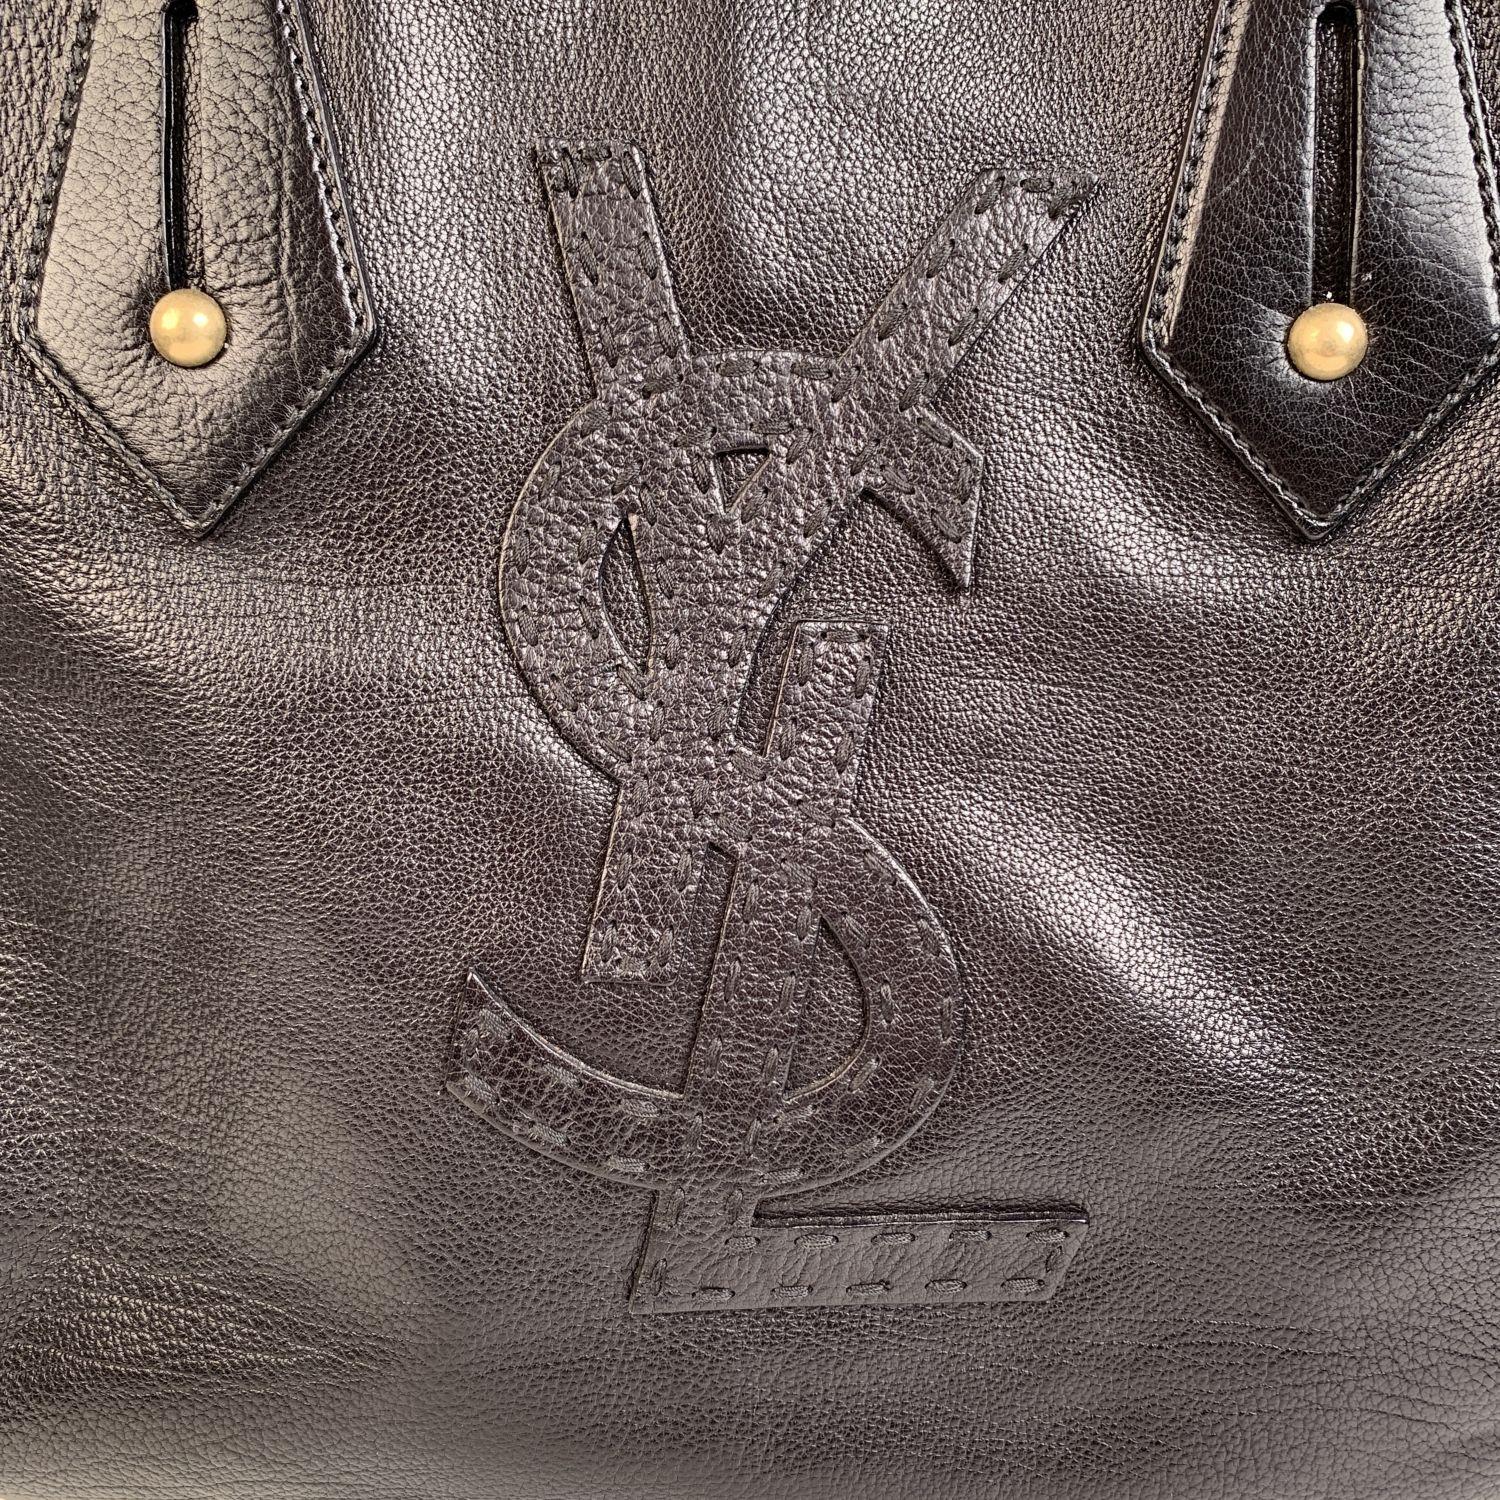 This bag will come with a Certificate of Authenticity provided by Entrupy, at no further cost.

YVES SAINT LAURENT black leather tote bag, with big YSL logo on the front. Magnetic button closure on top. Double leather handles. Black satin lining. 1